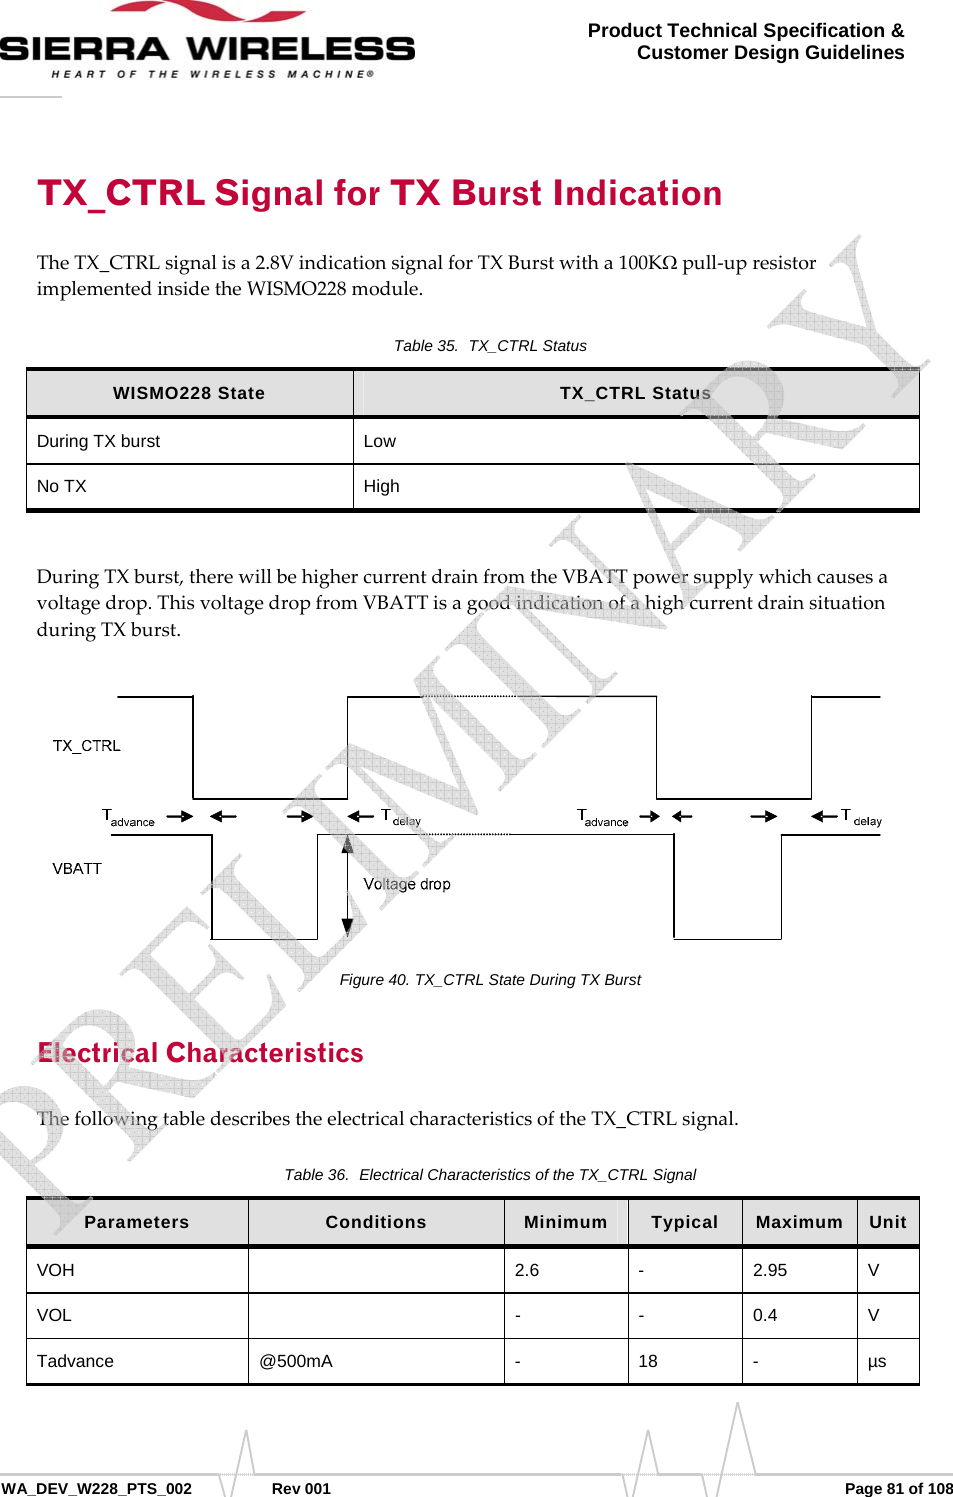      WA_DEV_W228_PTS_002 Rev 001  Page 81 of 108 Product Technical Specification &amp; Customer Design Guidelines TX_CTRL Signal for TX Burst Indication TheTX_CTRLsignalisa2.8VindicationsignalforTXBurstwitha100KΩpull‐upresistorimplementedinsidetheWISMO228module.Table 35.  TX_CTRL Status WISMO228 State  TX_CTRL Status During TX burst  Low No TX  High DuringTXburst,therewillbehighercurrentdrainfromtheVBATTpowersupplywhichcausesavoltagedrop.ThisvoltagedropfromVBATTisagoodindicationofahighcurrentdrainsituationduringTXburst.Figure 40. TX_CTRL State During TX Burst Electrical Characteristics ThefollowingtabledescribestheelectricalcharacteristicsoftheTX_CTRLsignal.Table 36.  Electrical Characteristics of the TX_CTRL Signal Parameters  Conditions  Minimum  Typical  Maximum  Unit VOH   2.6 - 2.95 V VOL   - - 0.4 V Tadvance @500mA  - 18 - µs    